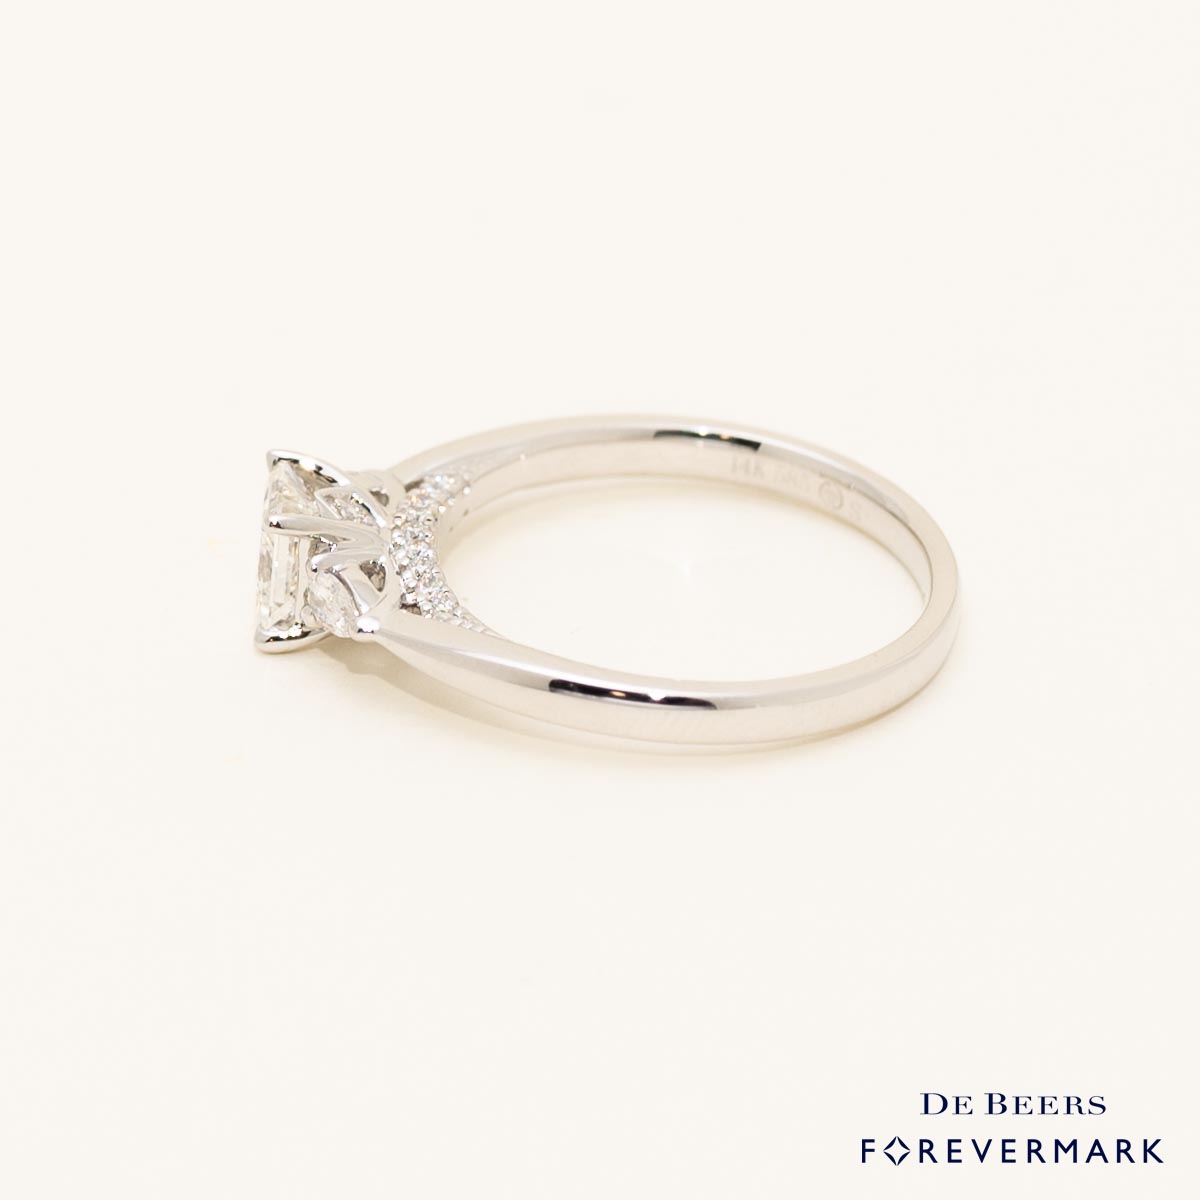 De Beers Forevermark Princess Cut Diamond Three Stone Engagement Ring in 14kt White Gold (3/4ct tw)